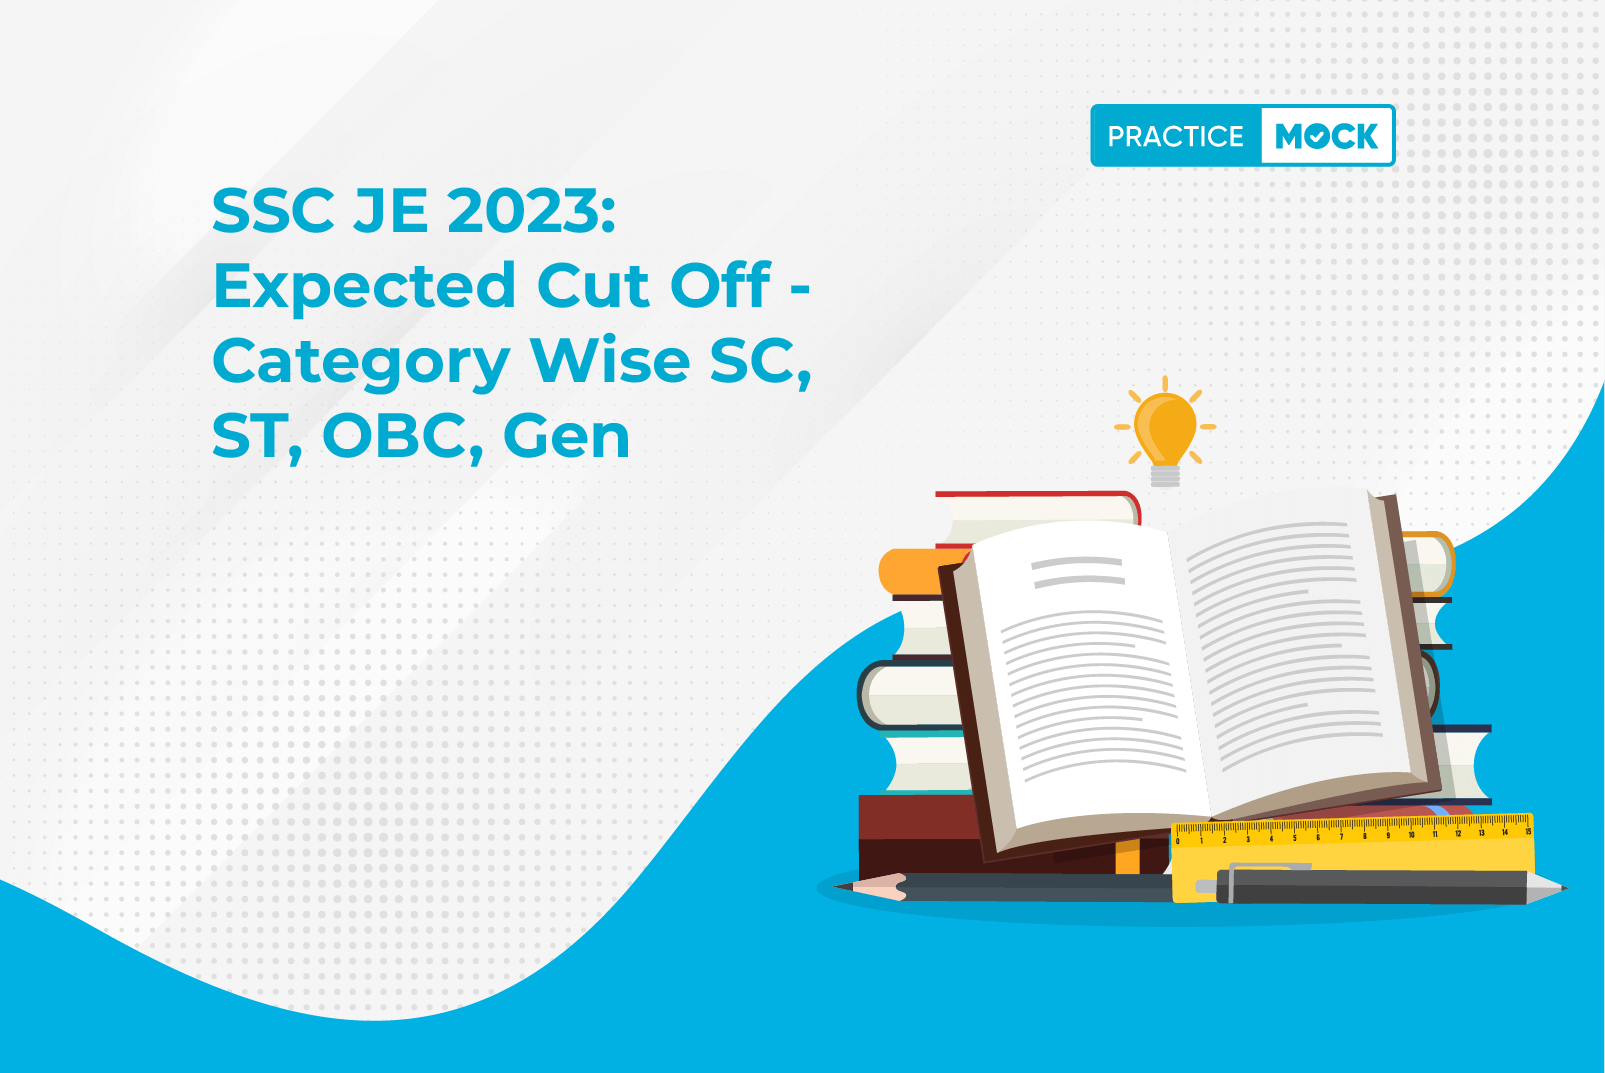 SSC JE 2023: Expected Cut Off -Category Wise SC, ST, OBC, Gen